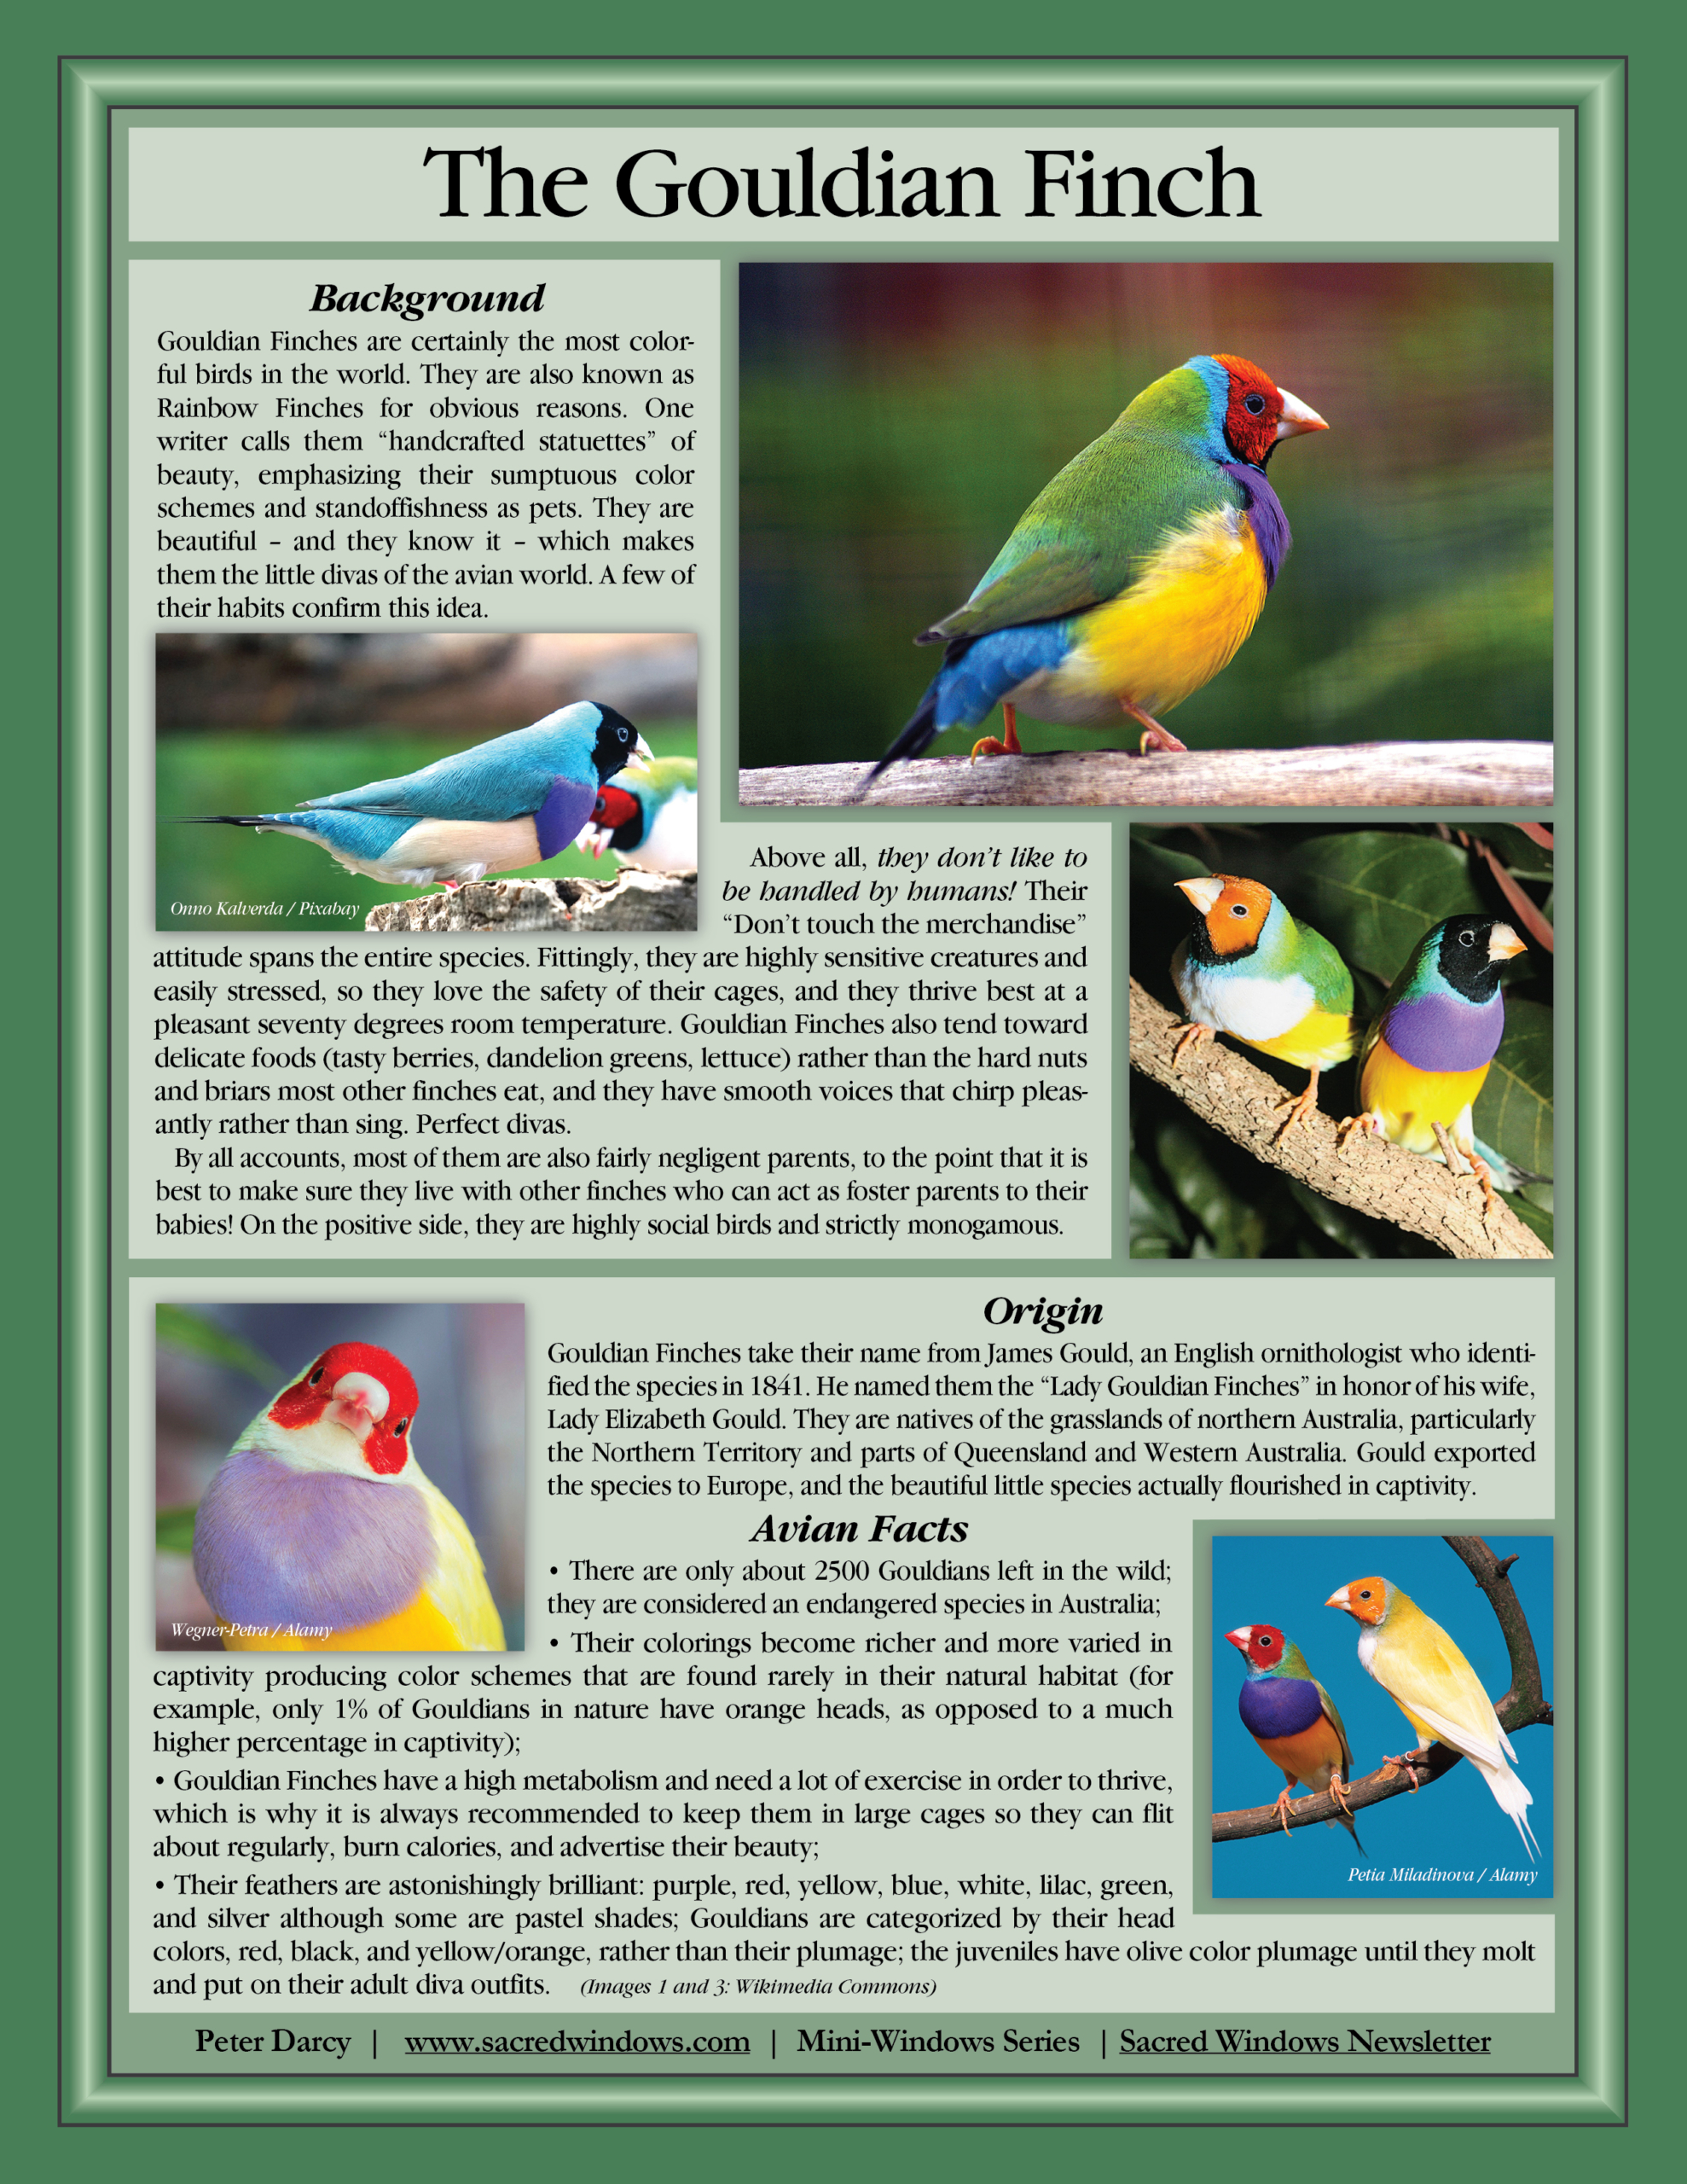 Mini-Window of Gouldian Finch with text